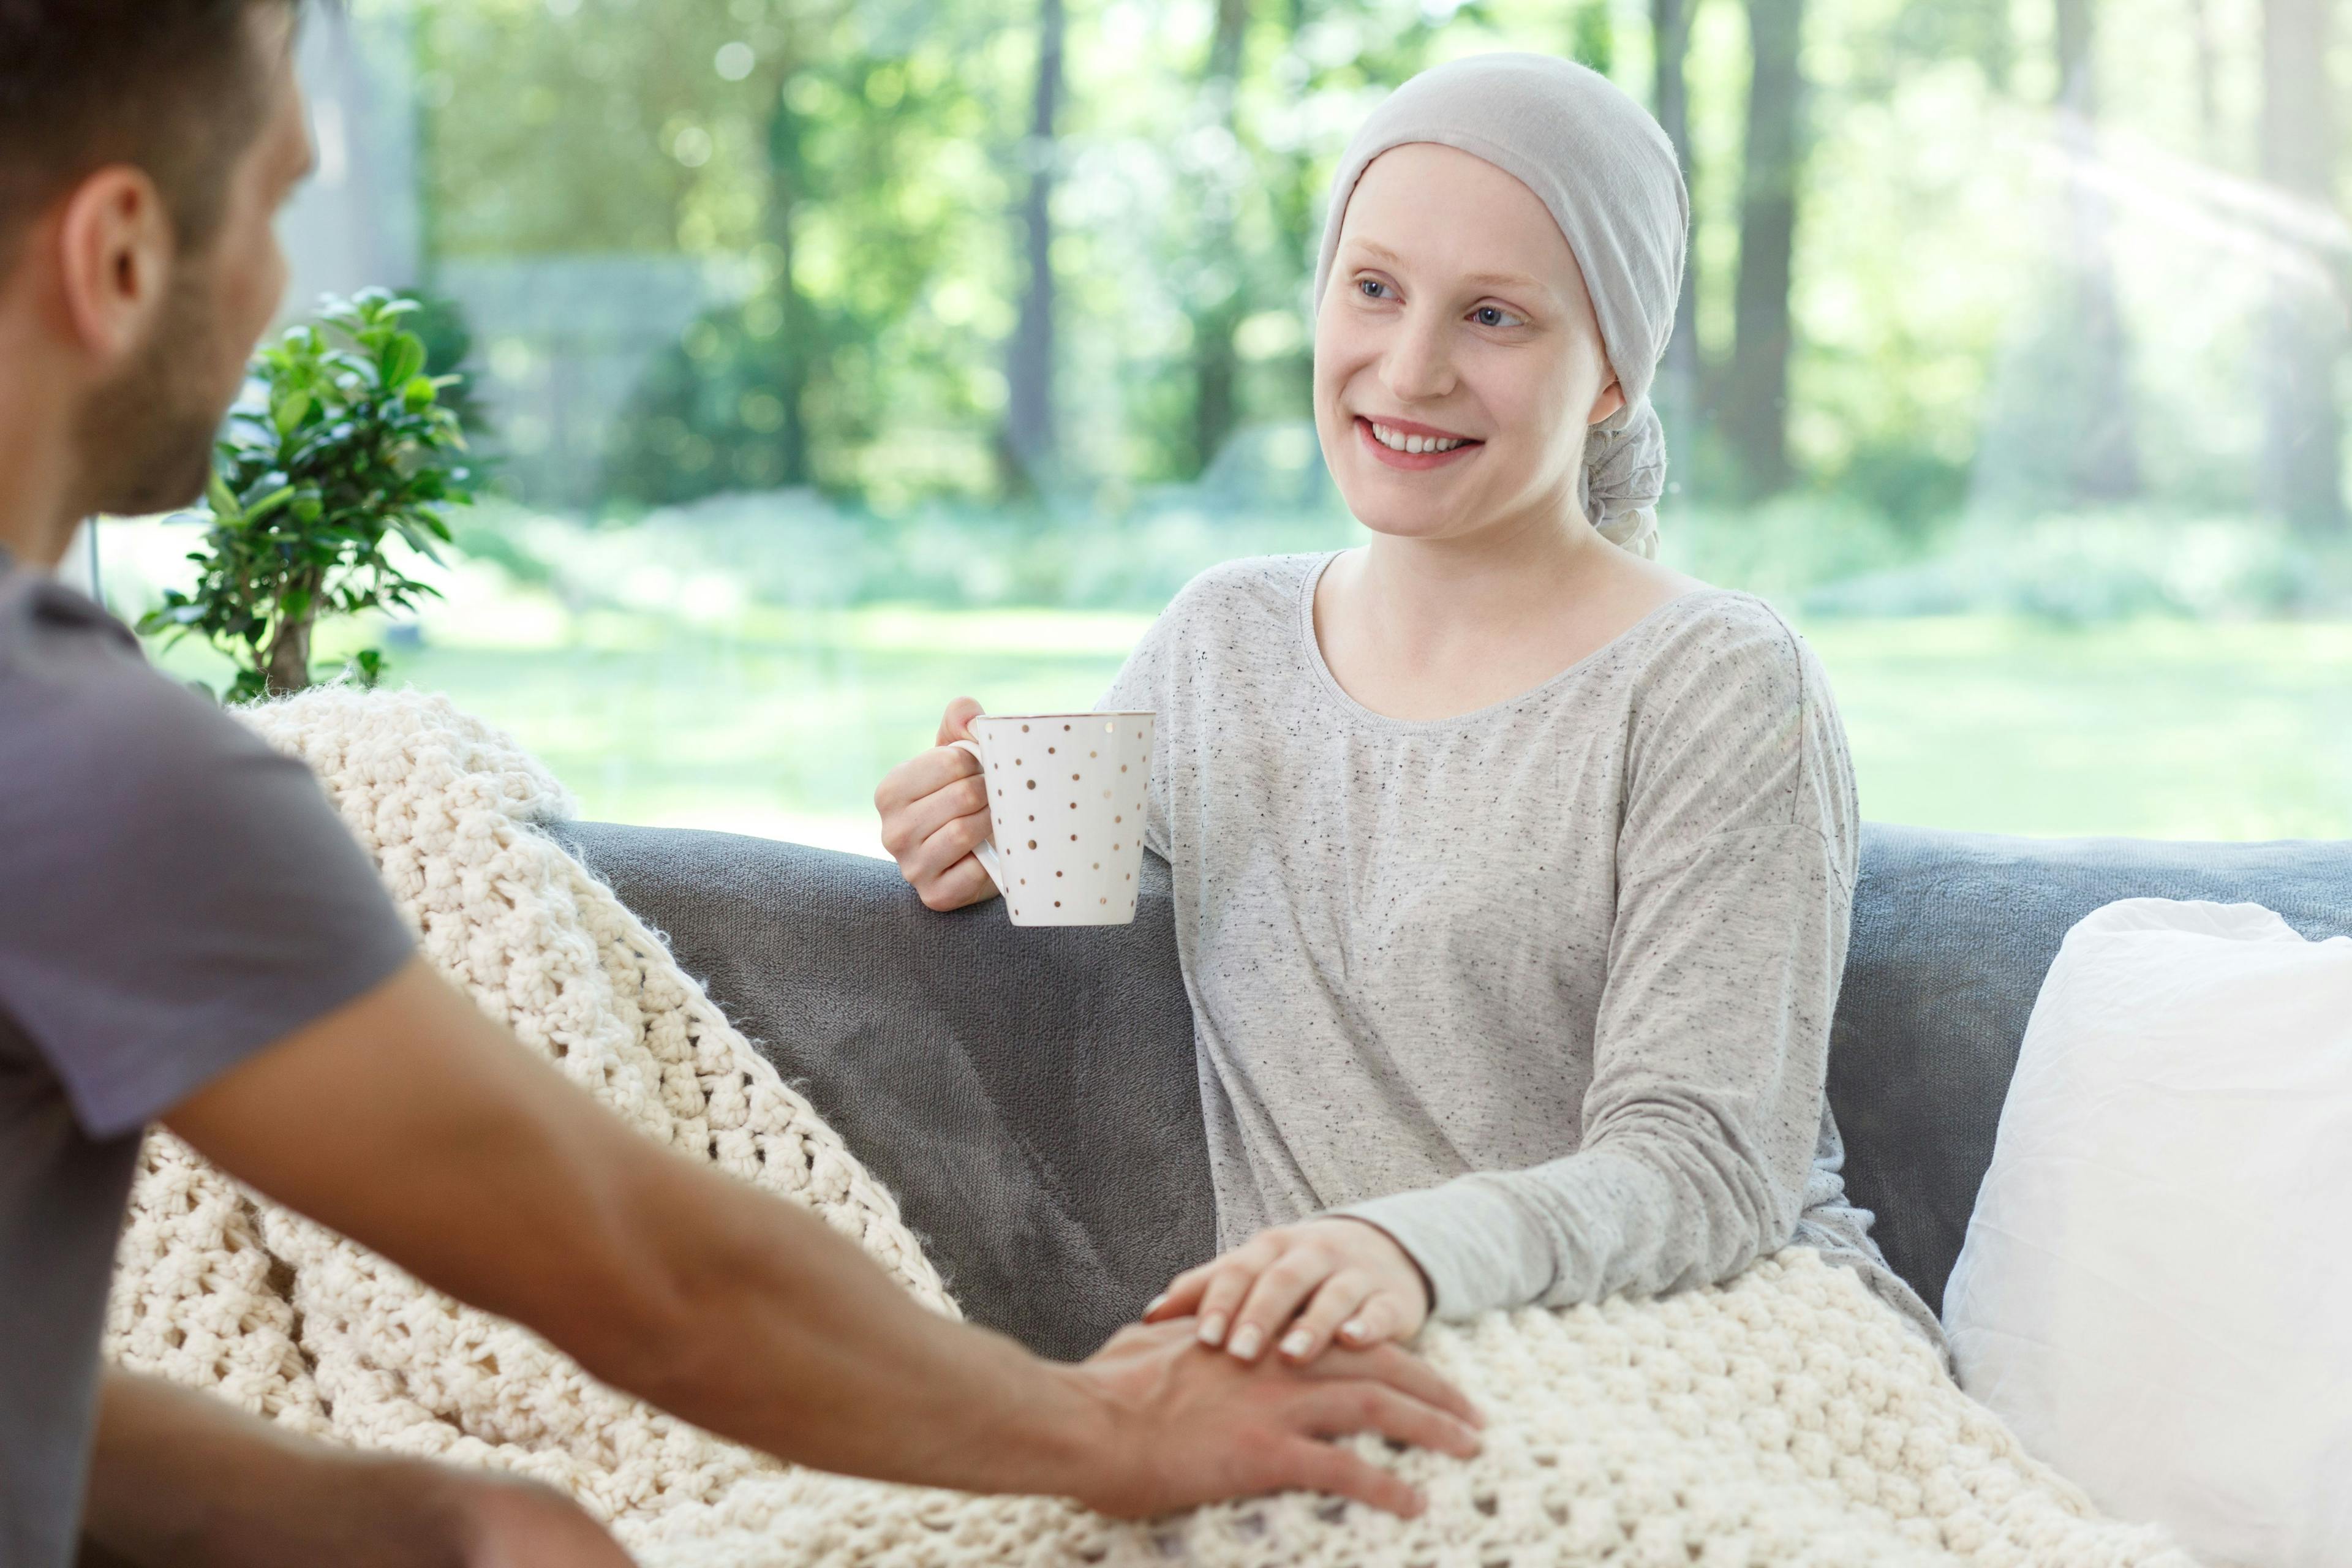 At-Home Oncology Care Reduces Hospitalizations and Outpatient Visit Times